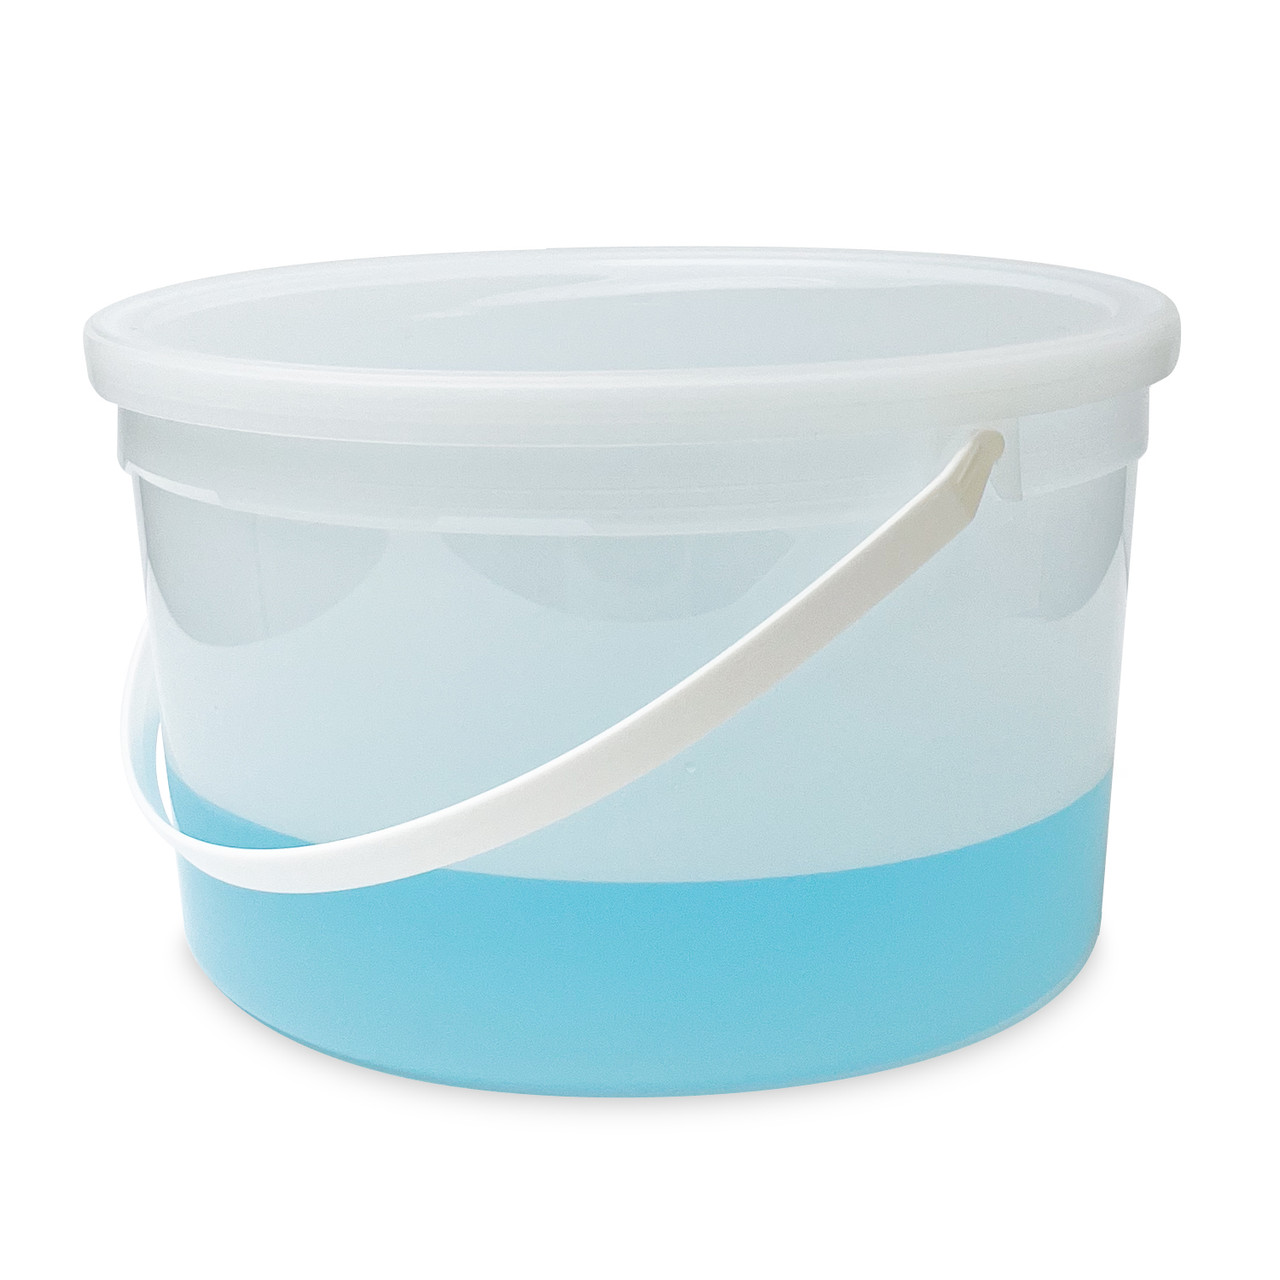 1 Gallon BPA Free Food Grade Round Plastic Bucket with White Plastic Handle  with Lid (T808128B & L808) - starting quantity 30 count - FREE SHIPPING